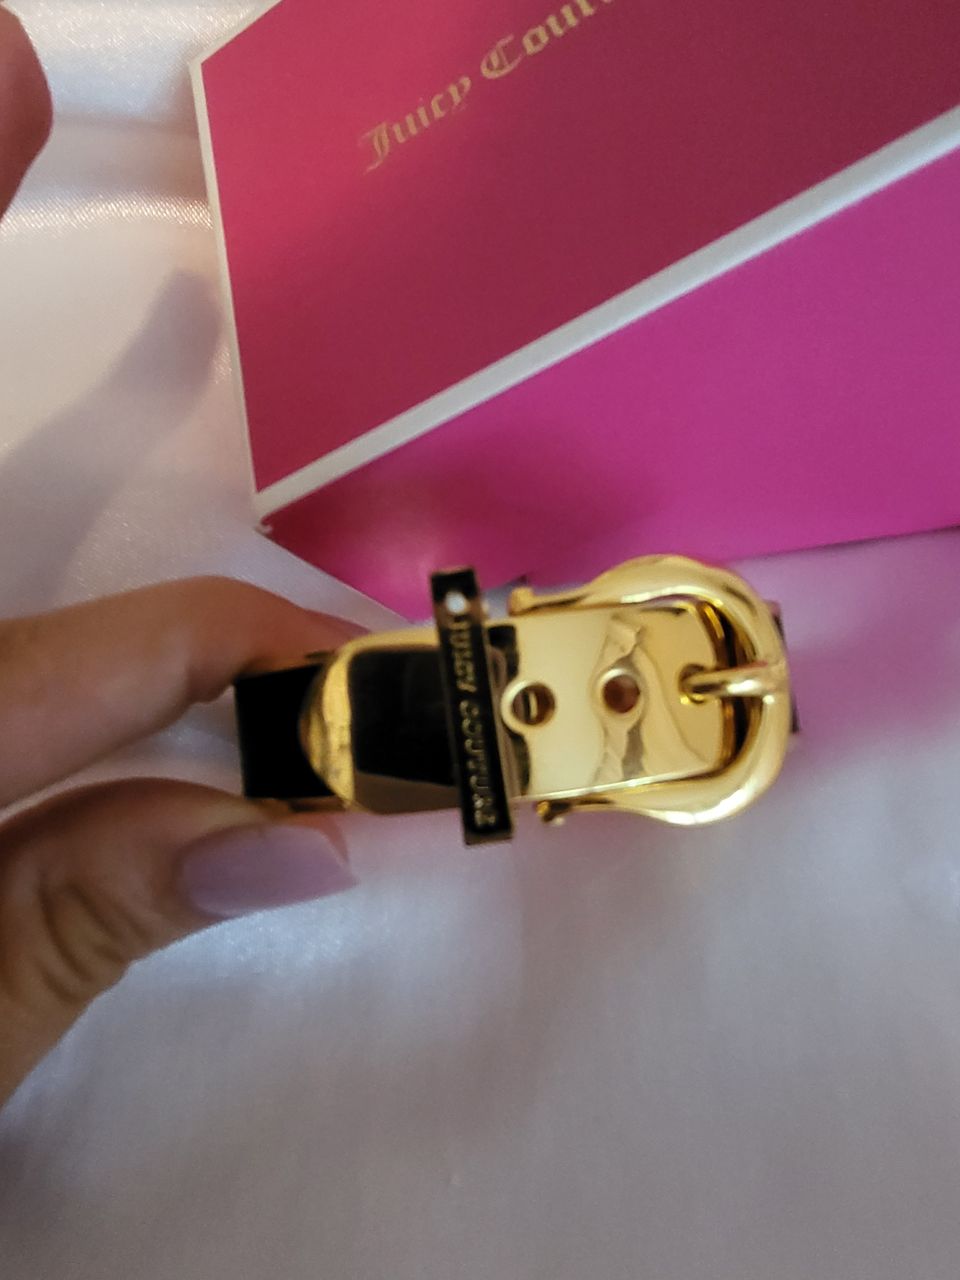 Juicy couture rannerengas